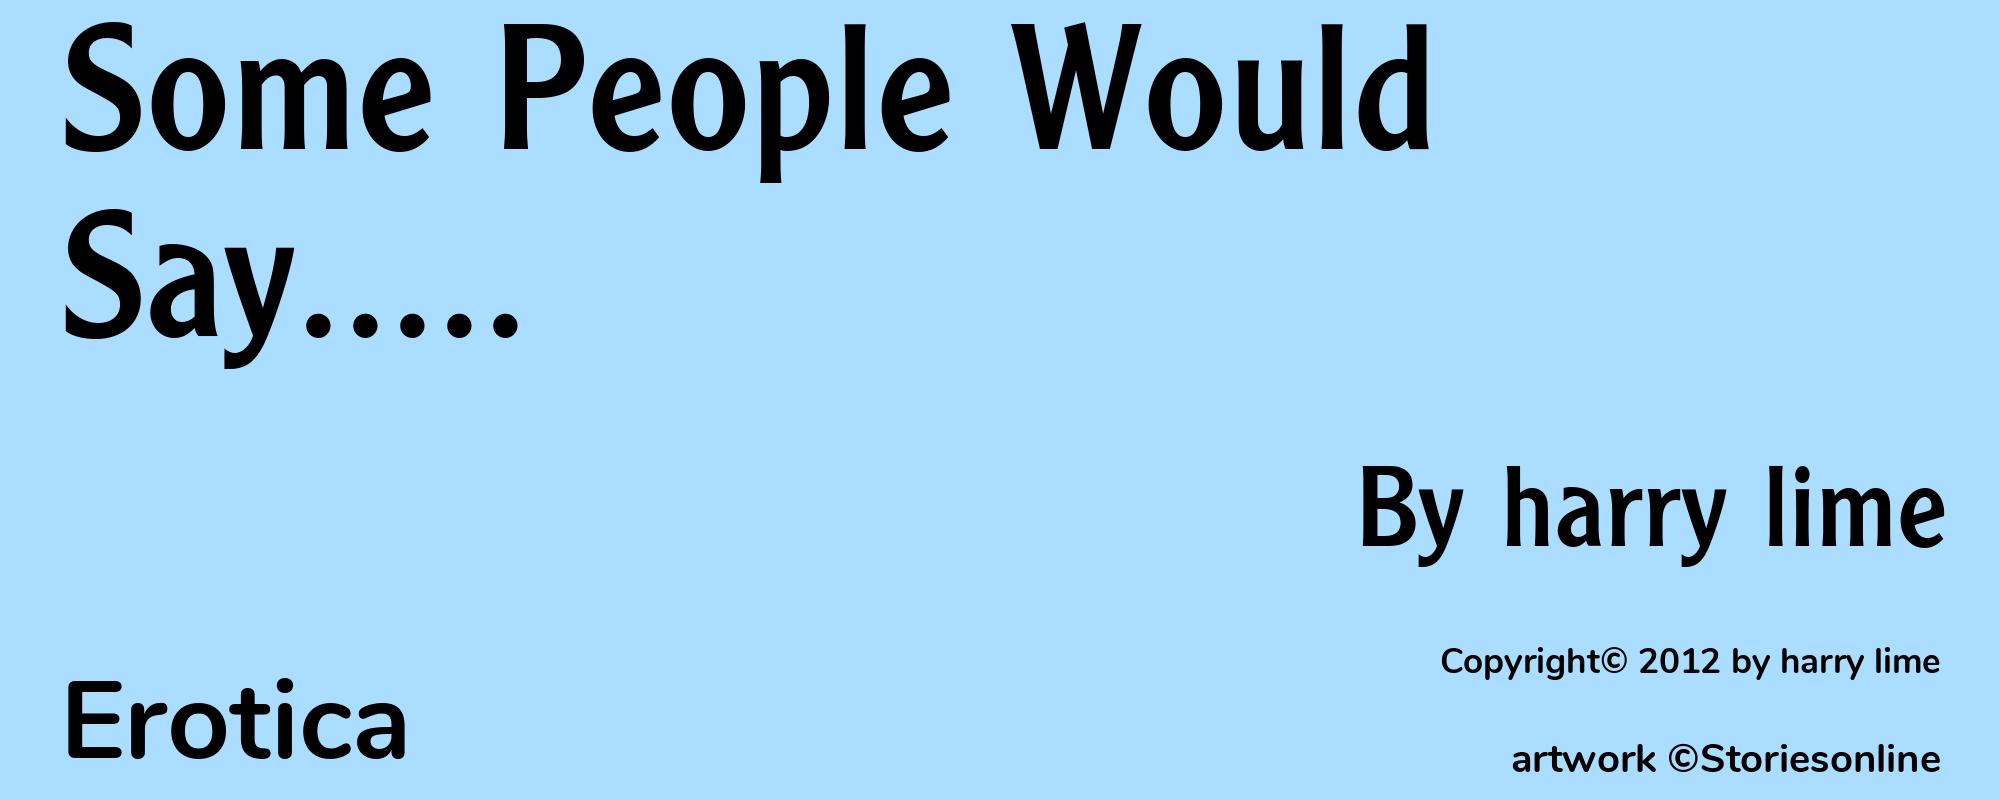 Some People Would Say..... - Cover